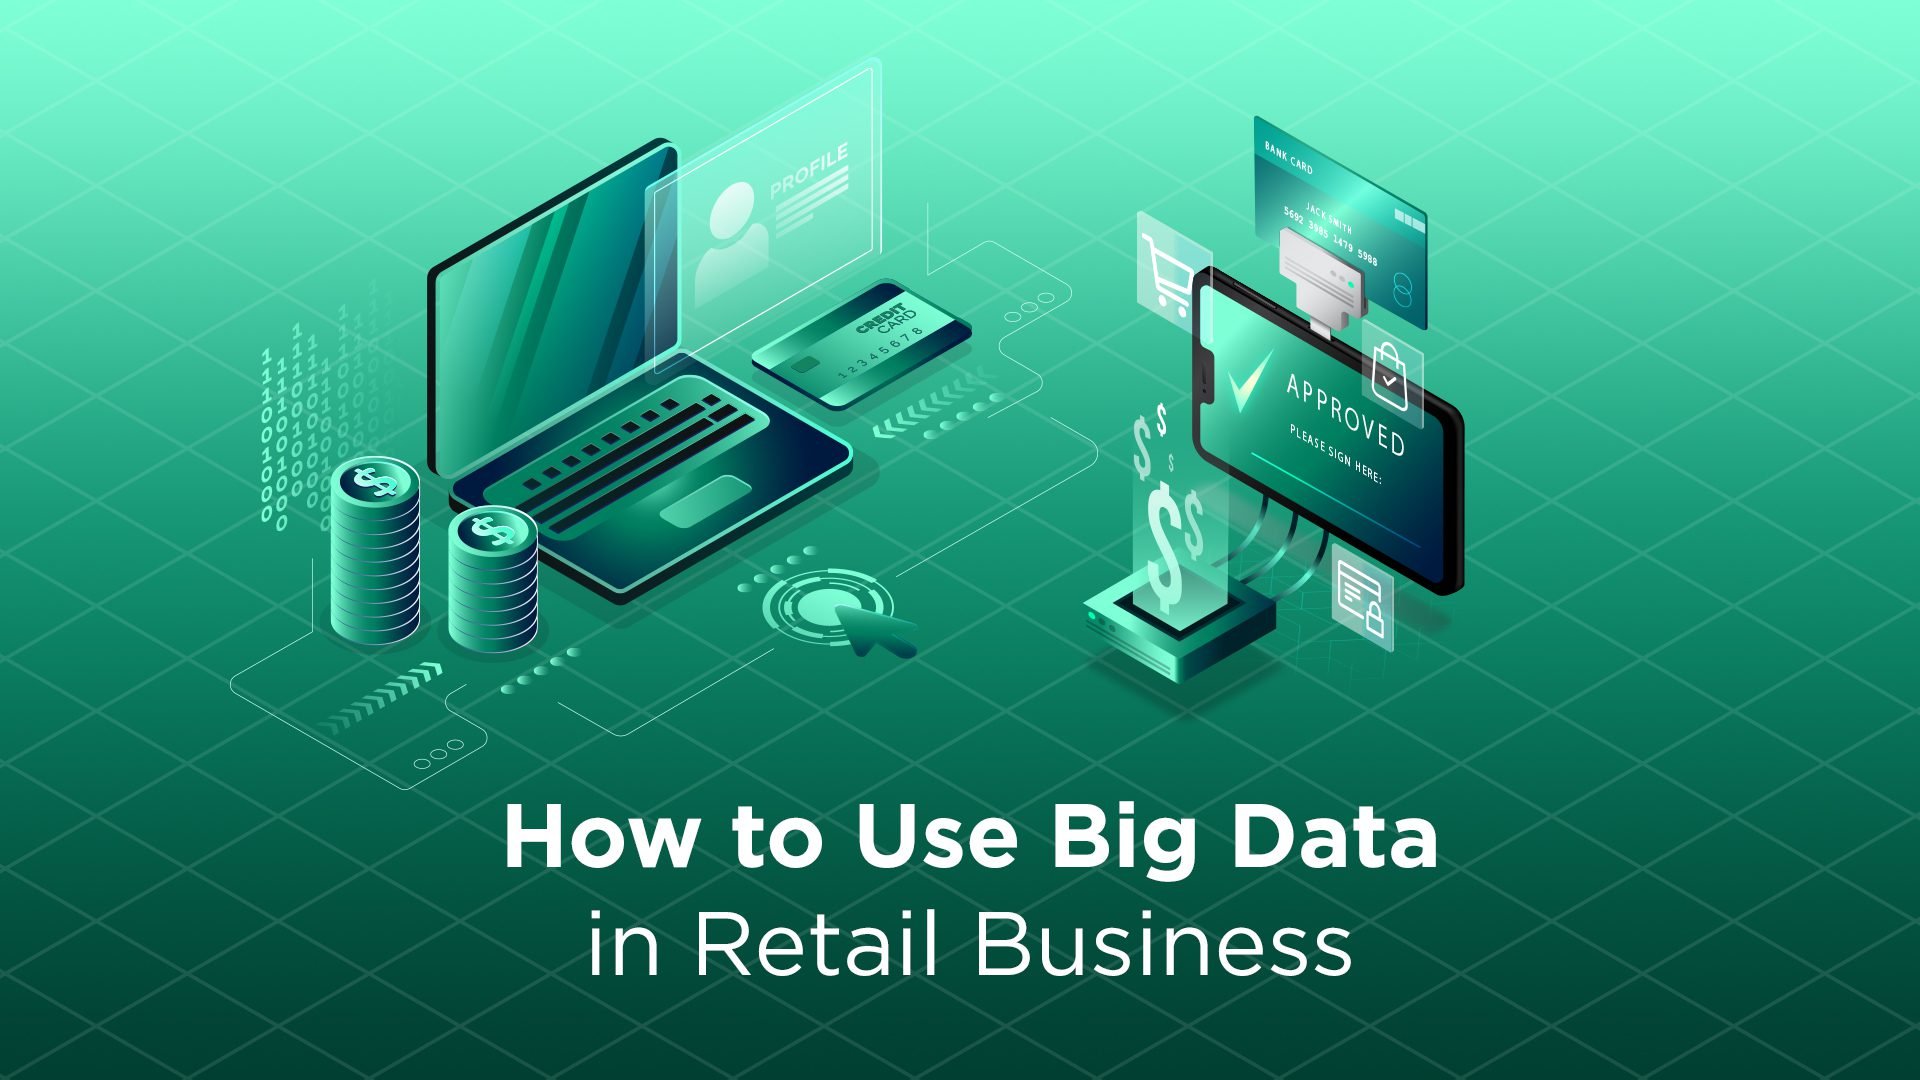 How A Big Data Can Be Used In Retail Banking?